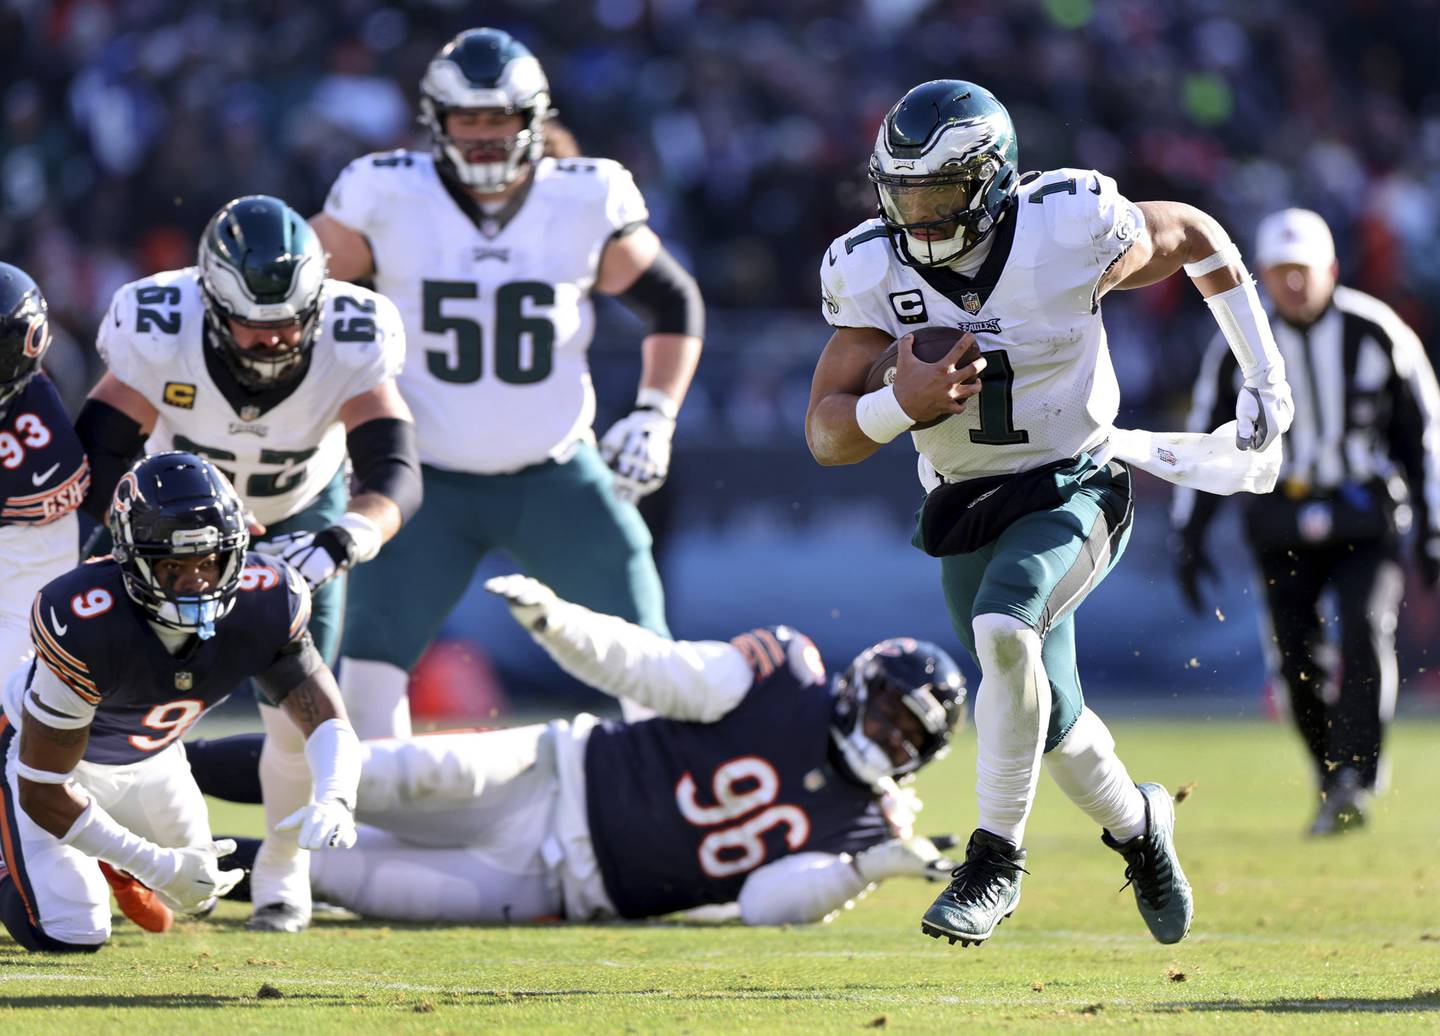 Eagles quarterback Jalen Hurts (1) runs for a touchdown in the second quarter against the Bears on Sunday, Dec. 18, 2022, at Soldier Field.